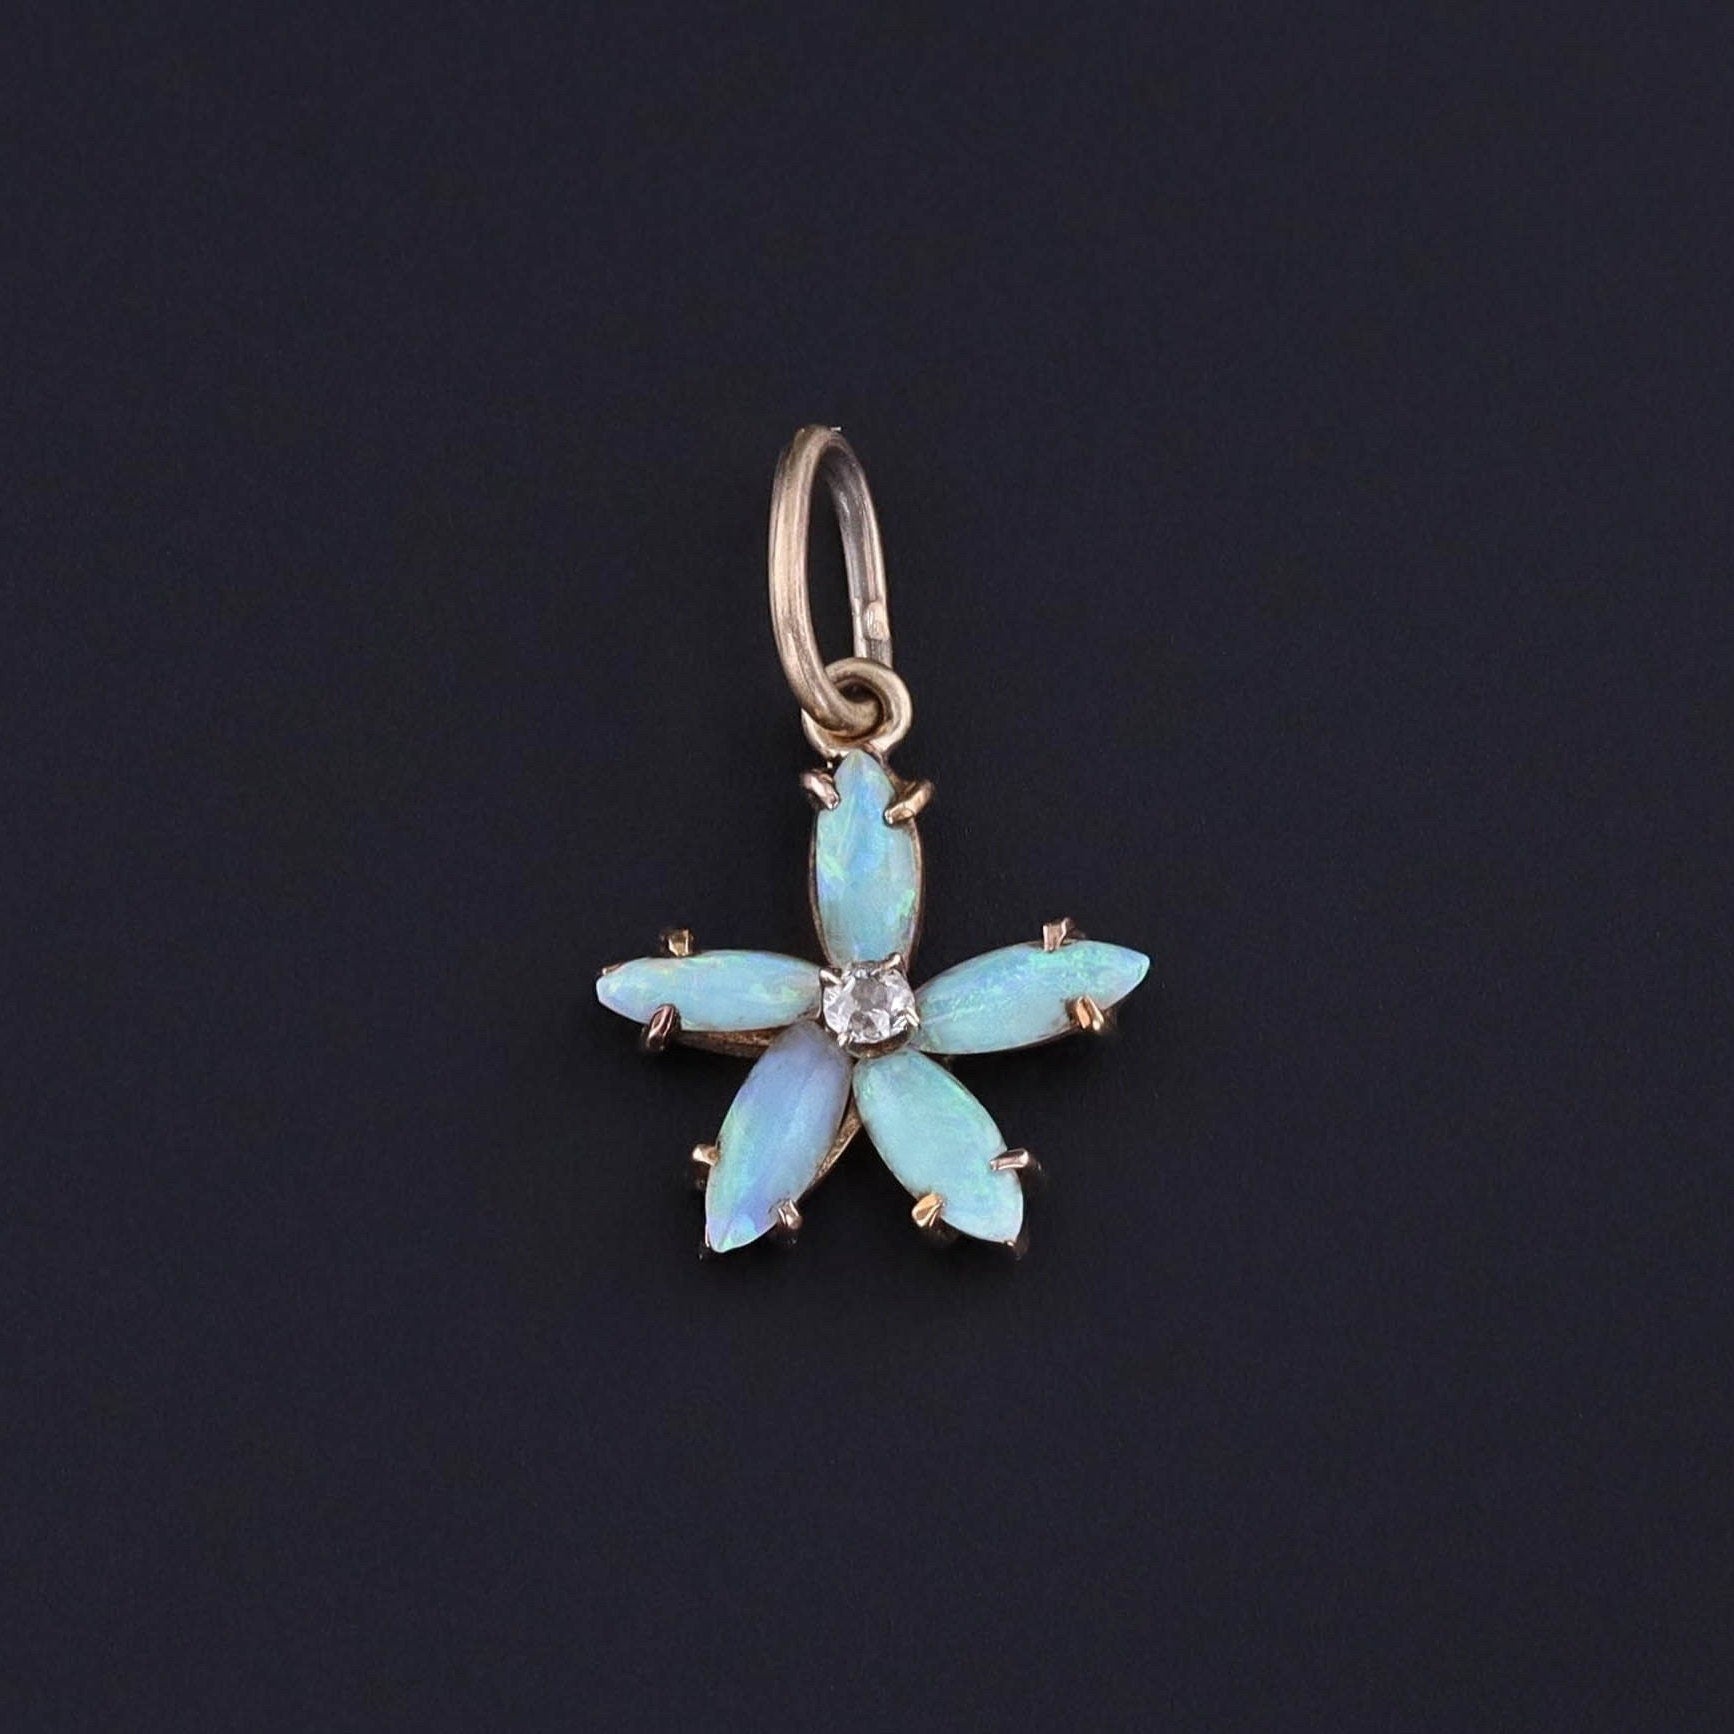 Antique Opal and Diamond Flower Charm of 14k Gold